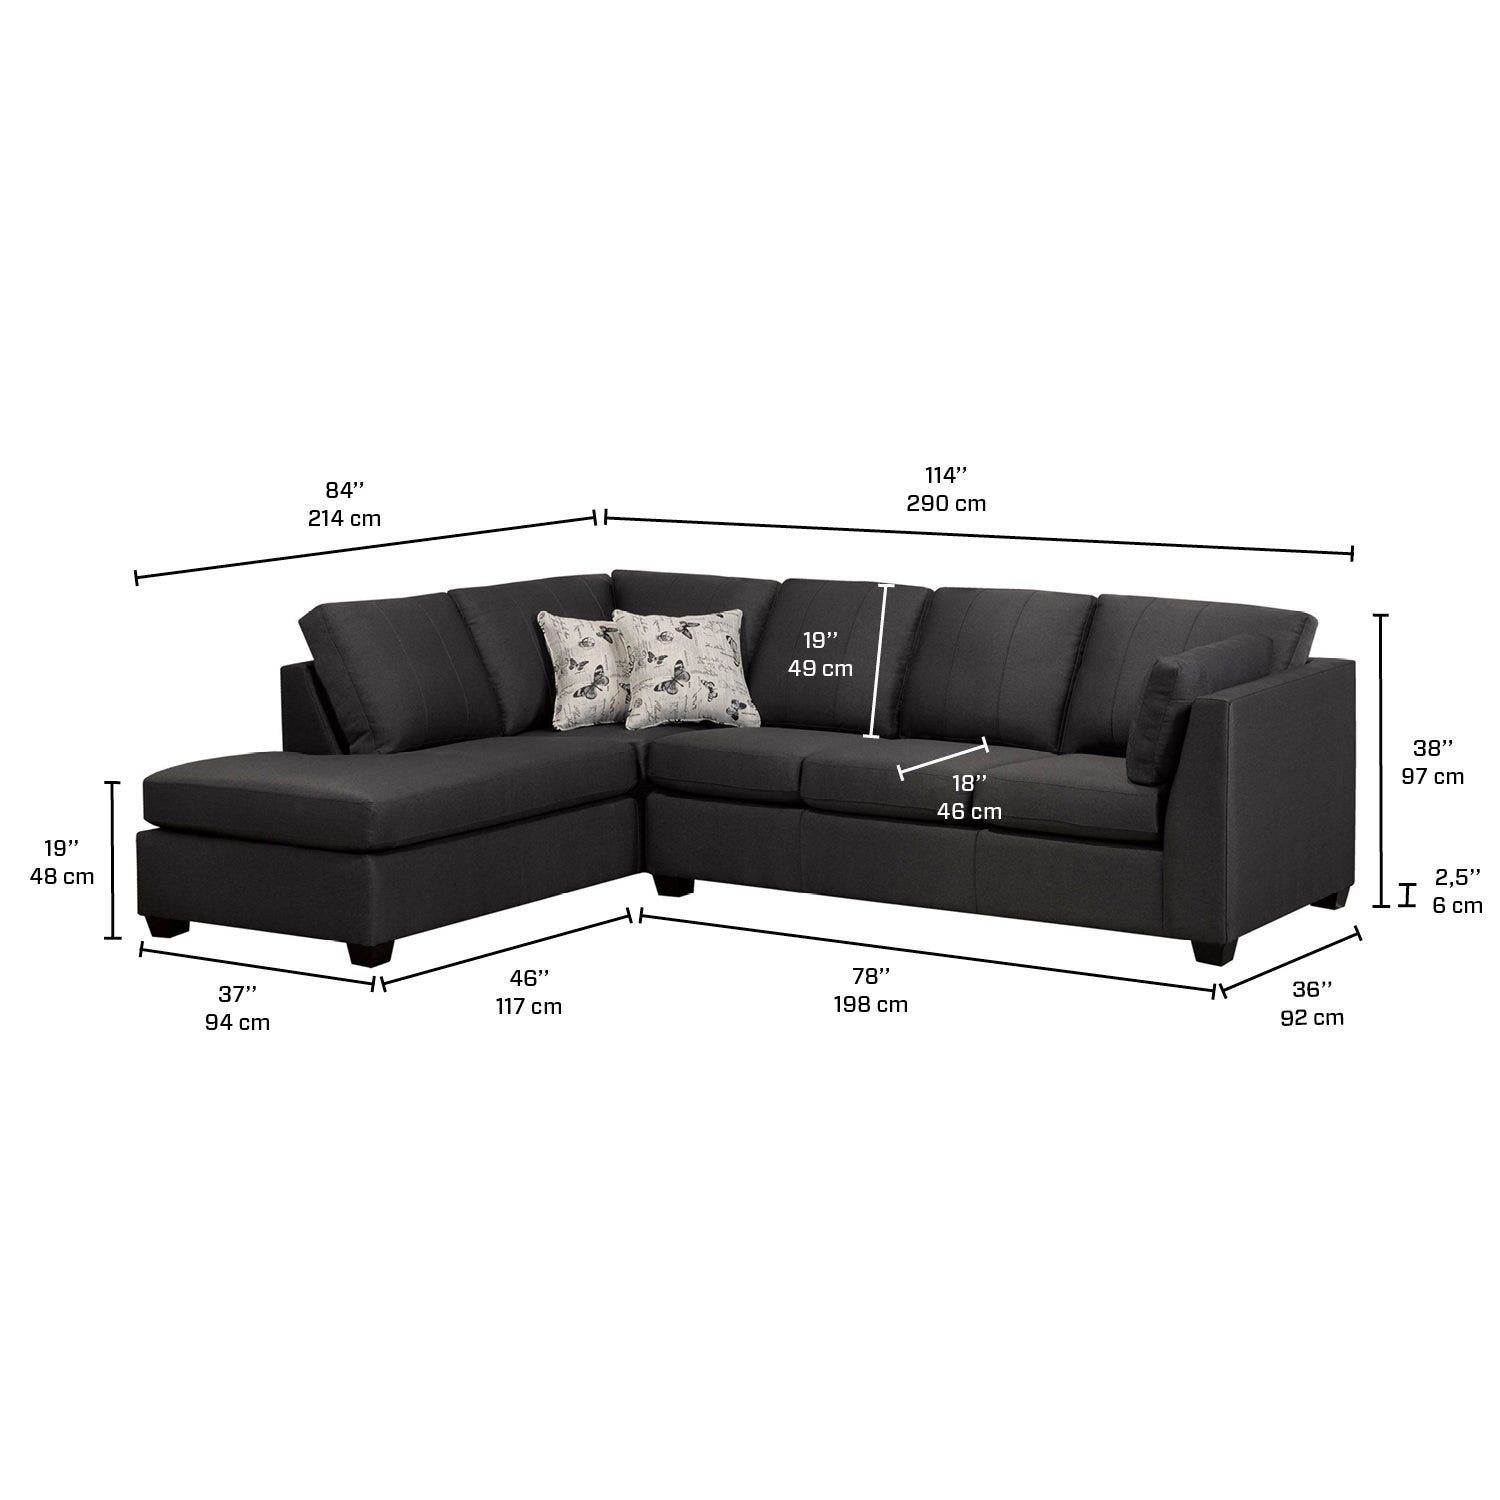 Canadian Made Stanley Dark Grey Fabric Sectional Sofa 9830